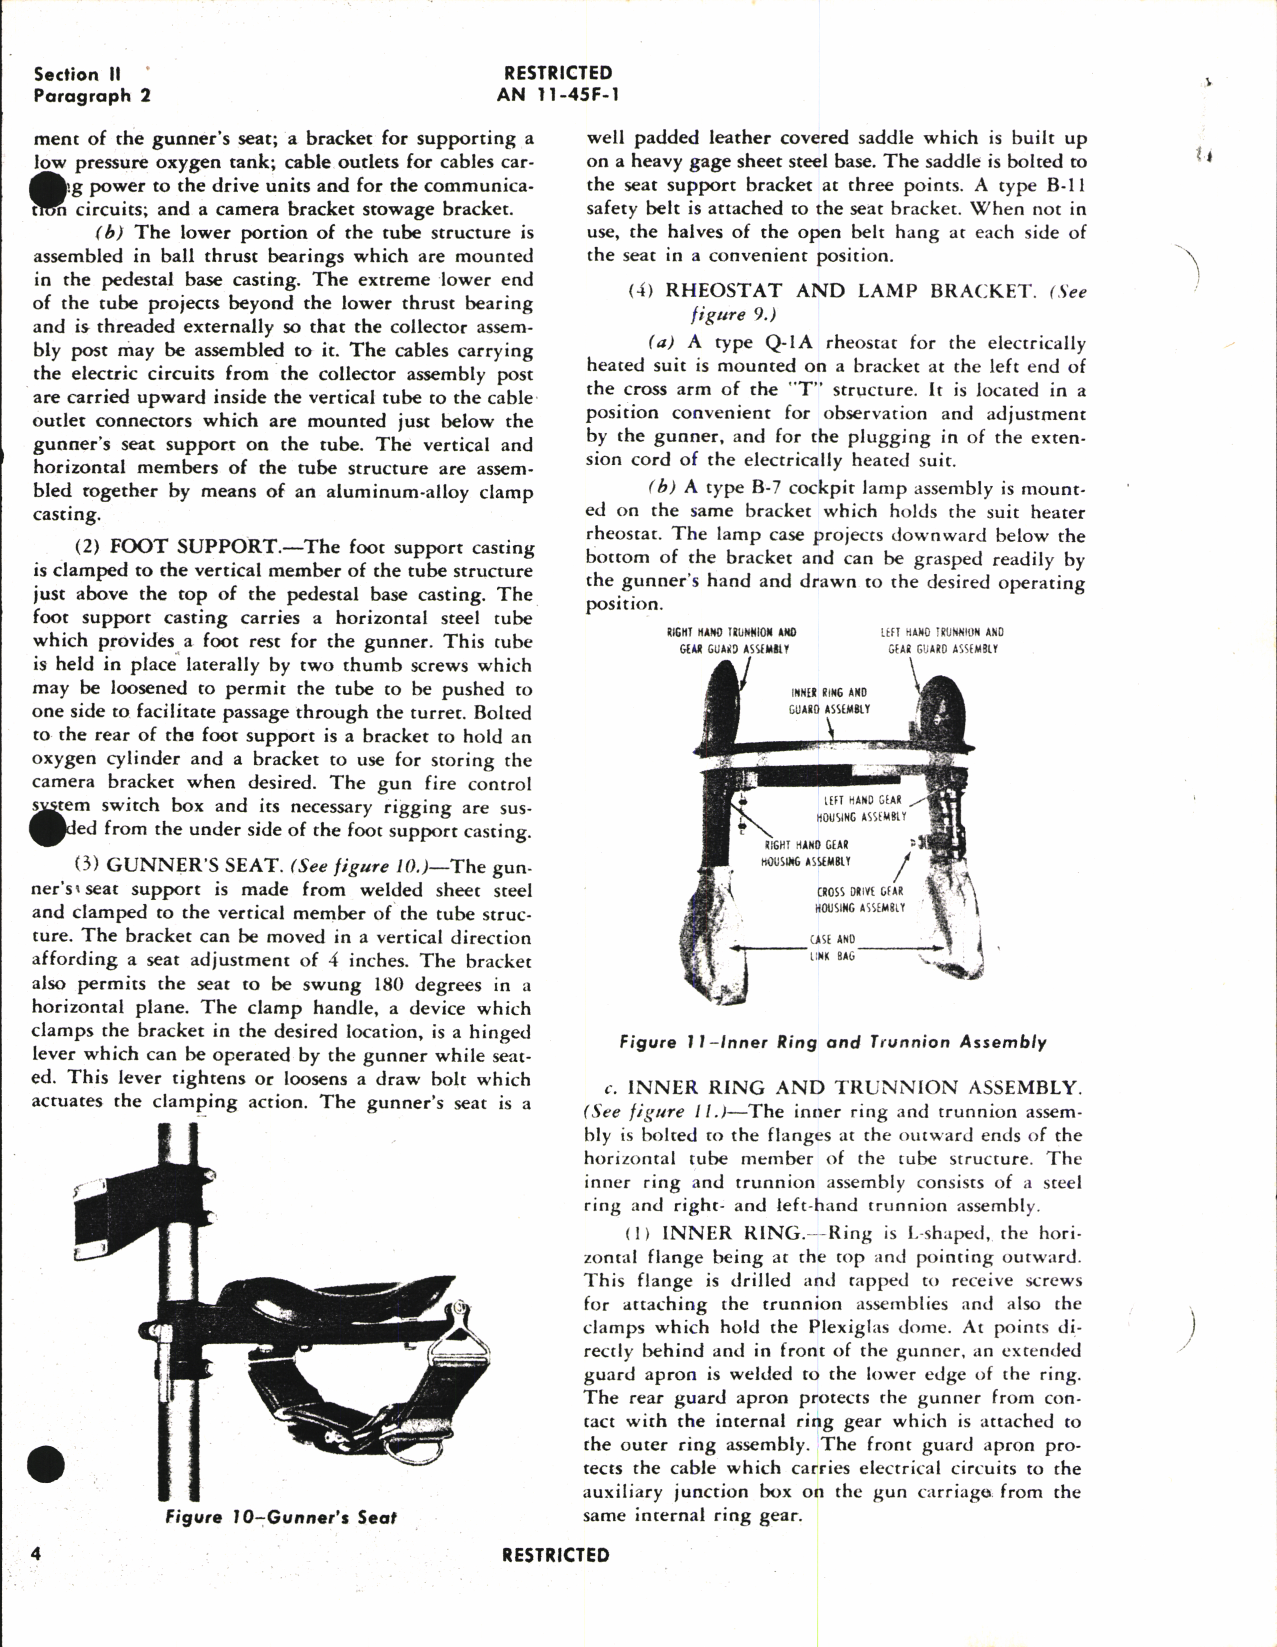 Sample page 8 from AirCorps Library document: Handbook of Instructions with Parts Catalog for Training Turret Type A-8